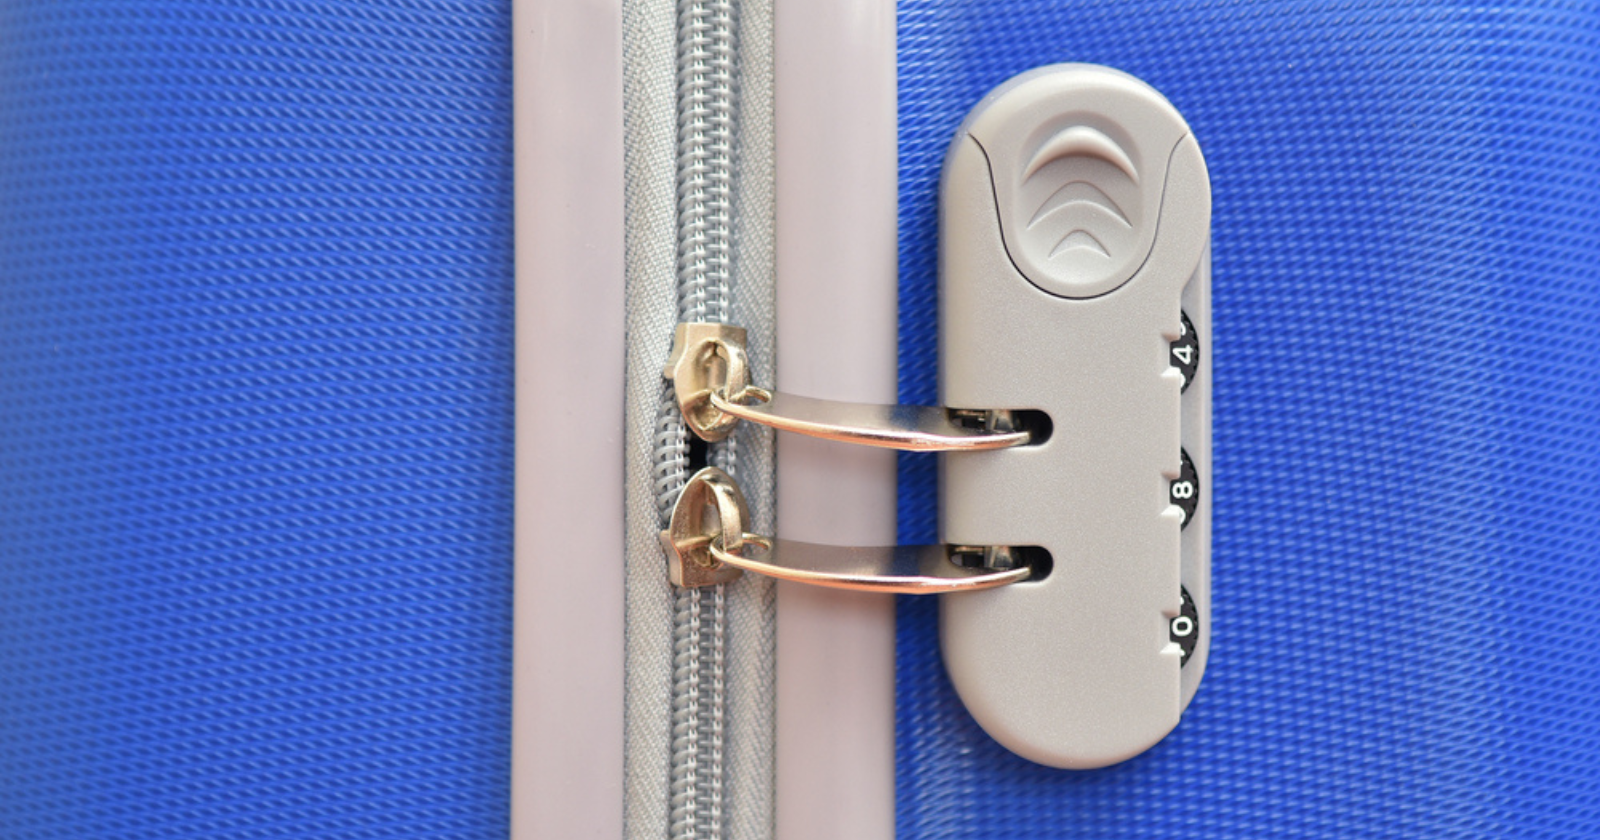 What To Do When Your Luggage Lock Won't Open 1